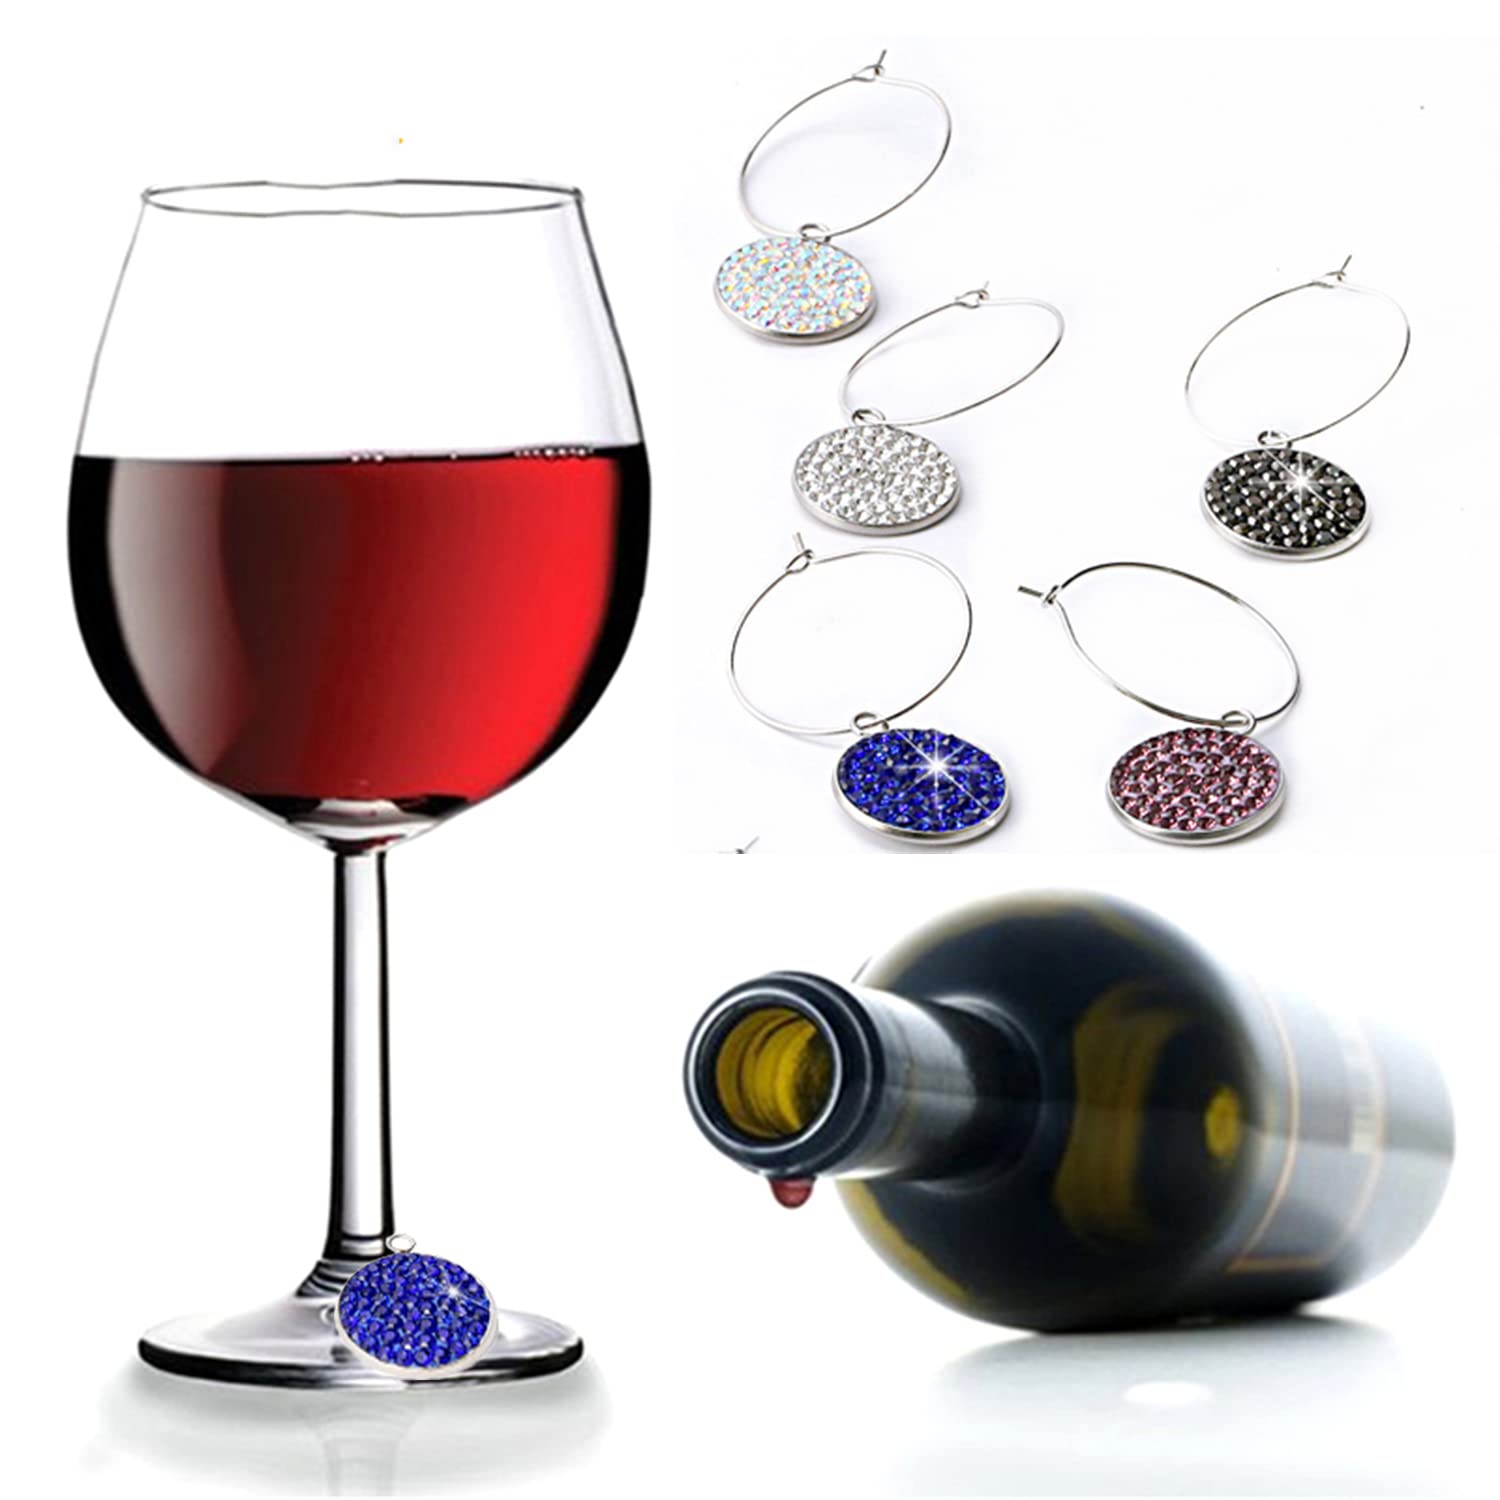 16pcs Bling Wine Glass Charms Markers Tags, Wine Charms for Stem Glasses, Wine Glass Identifier Tags with Bling Rhinestones Crystal for Stem Glasses Tasting Party Favors New Year.